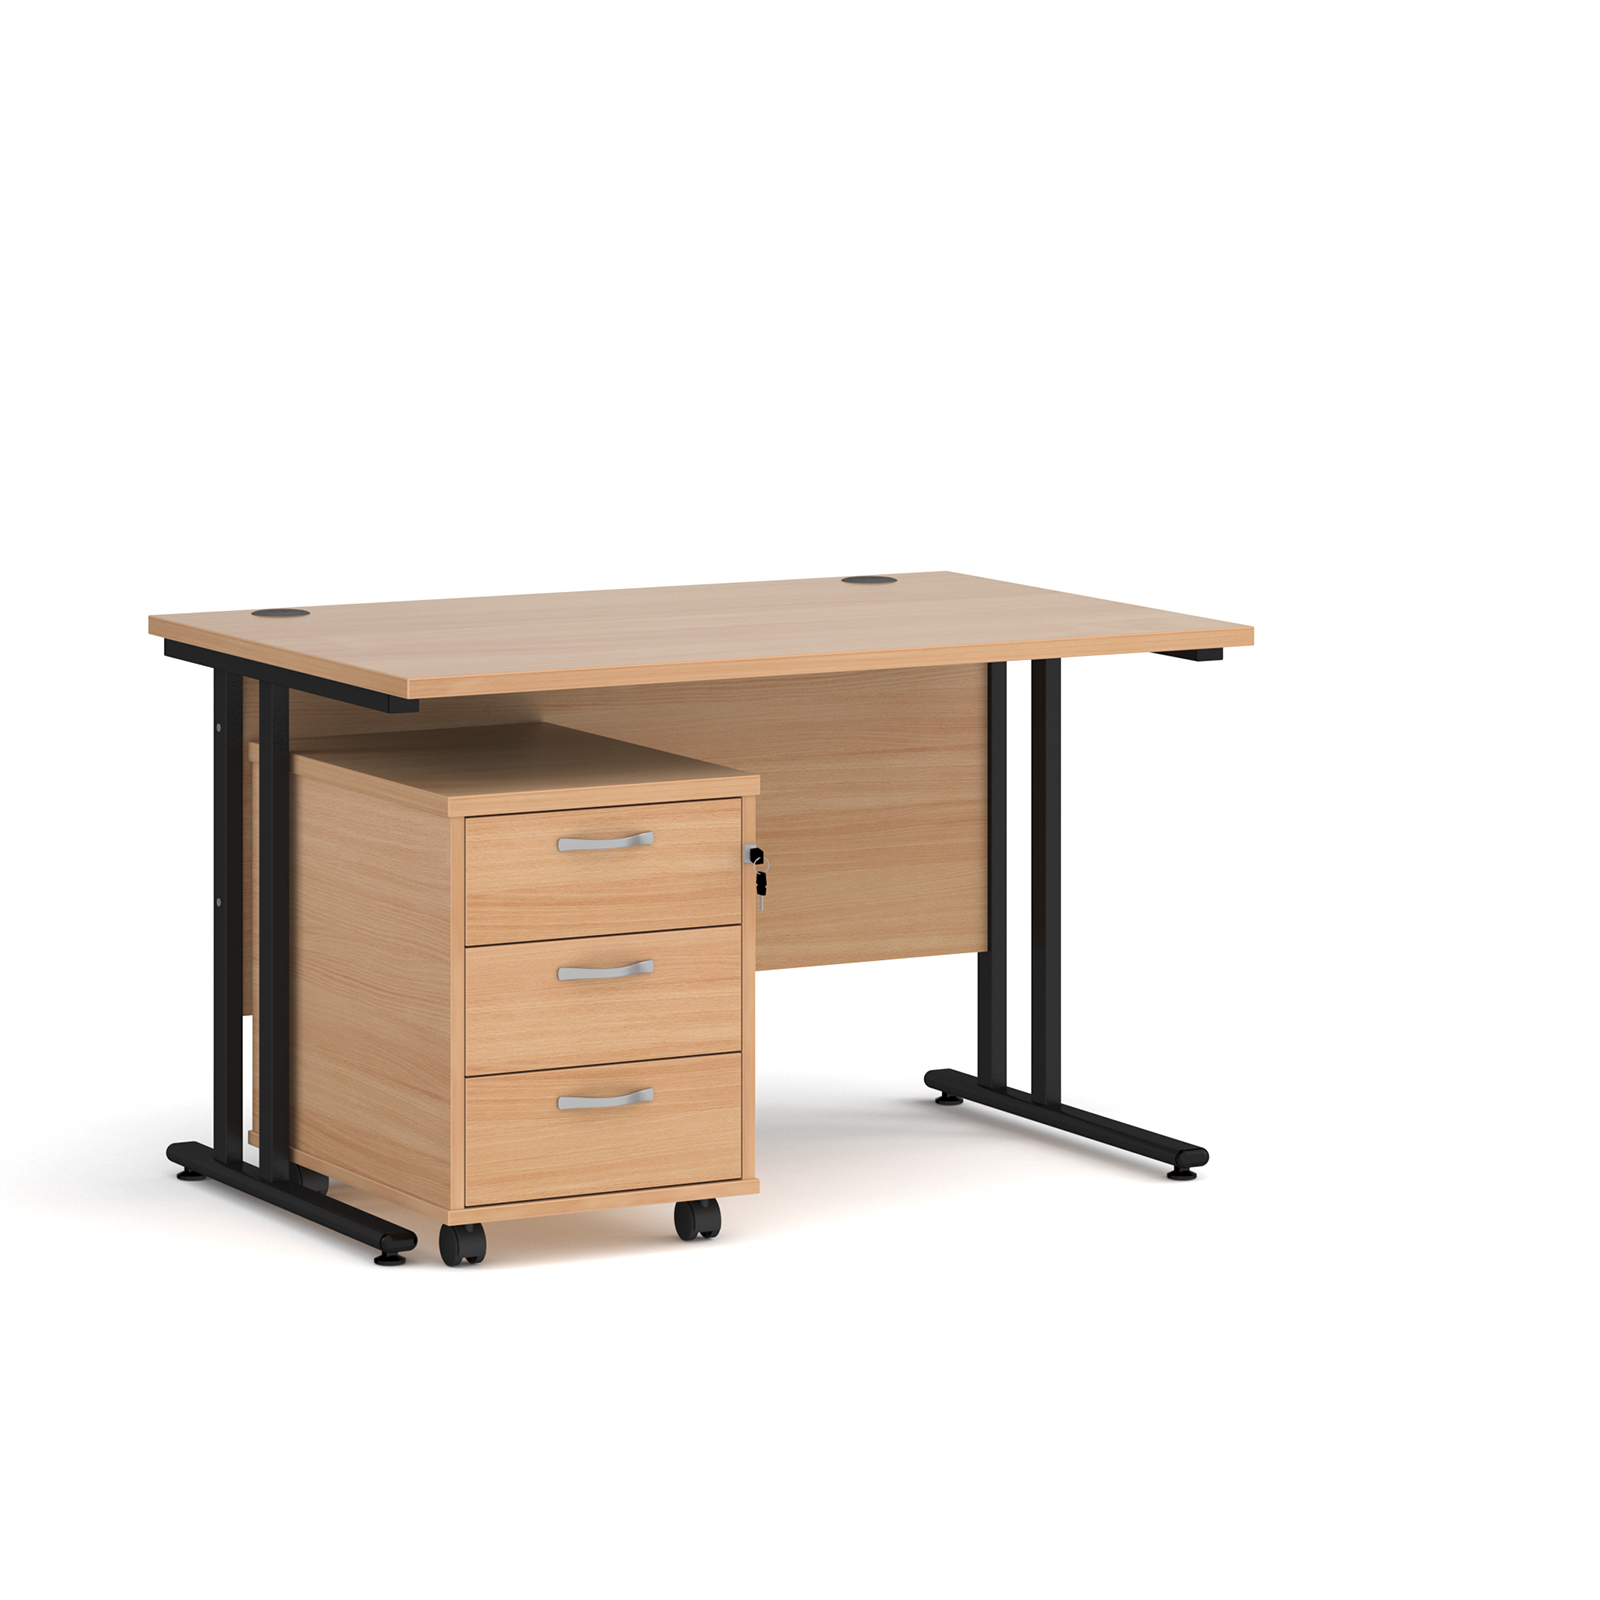 Maestro 25 straight desk 1200mm x 800mm with black cantilever frame and 3 drawer pedestal - beech